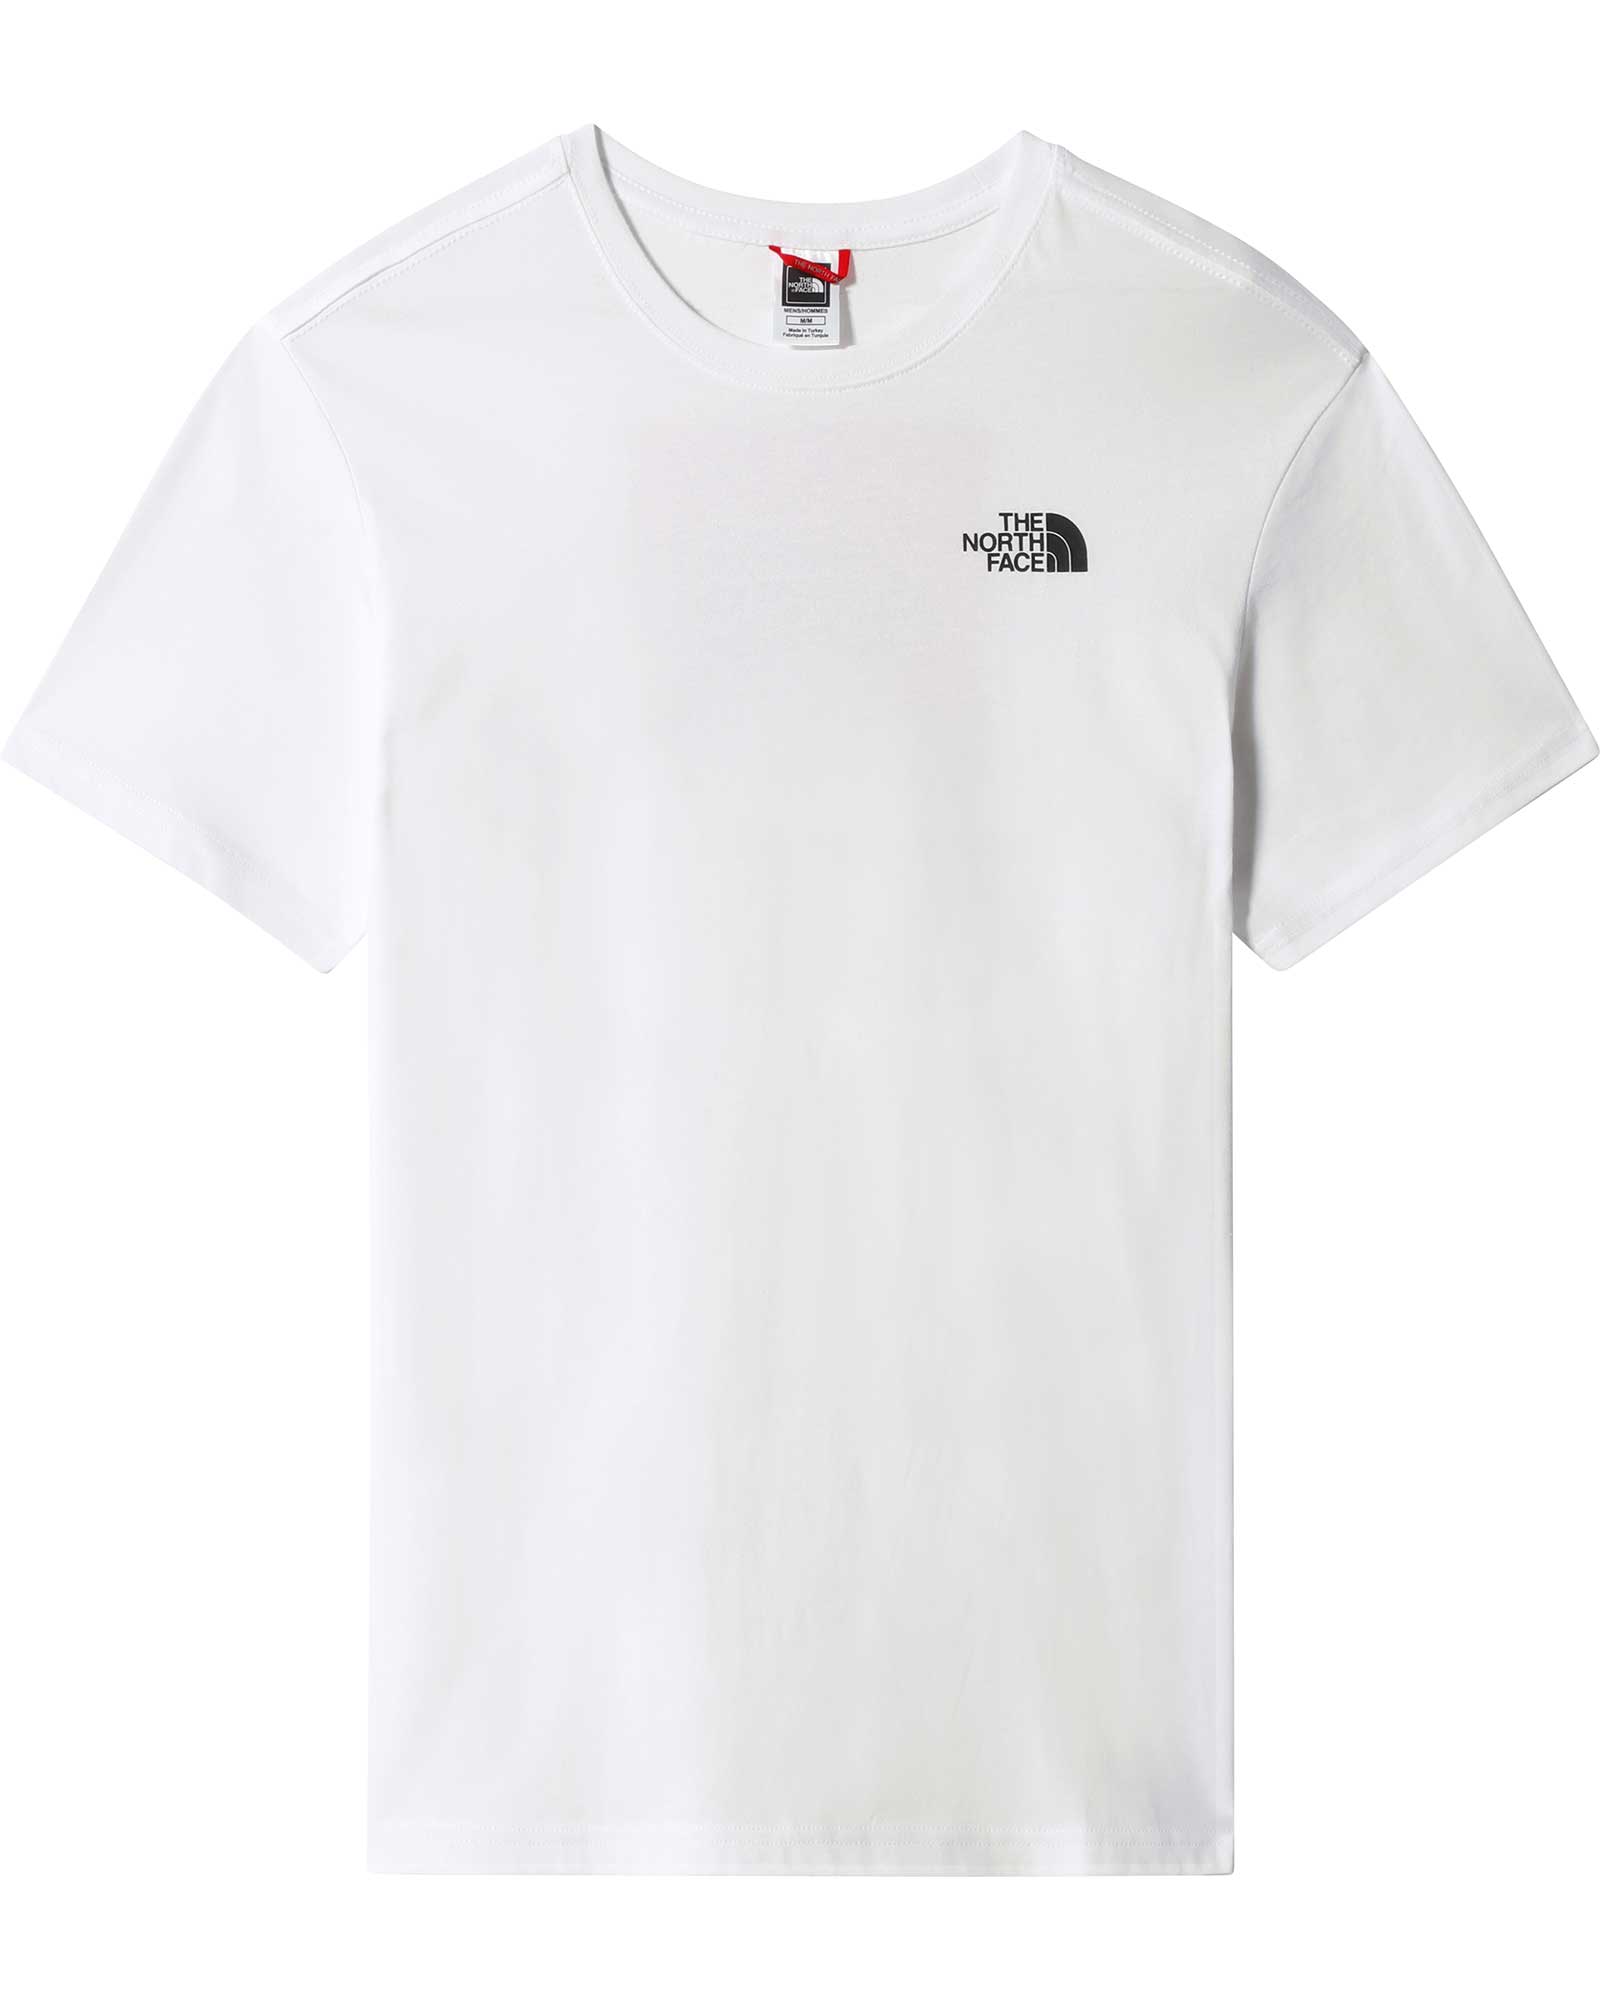 The North Face Red Box Men’s T Shirt - TNF White XXL